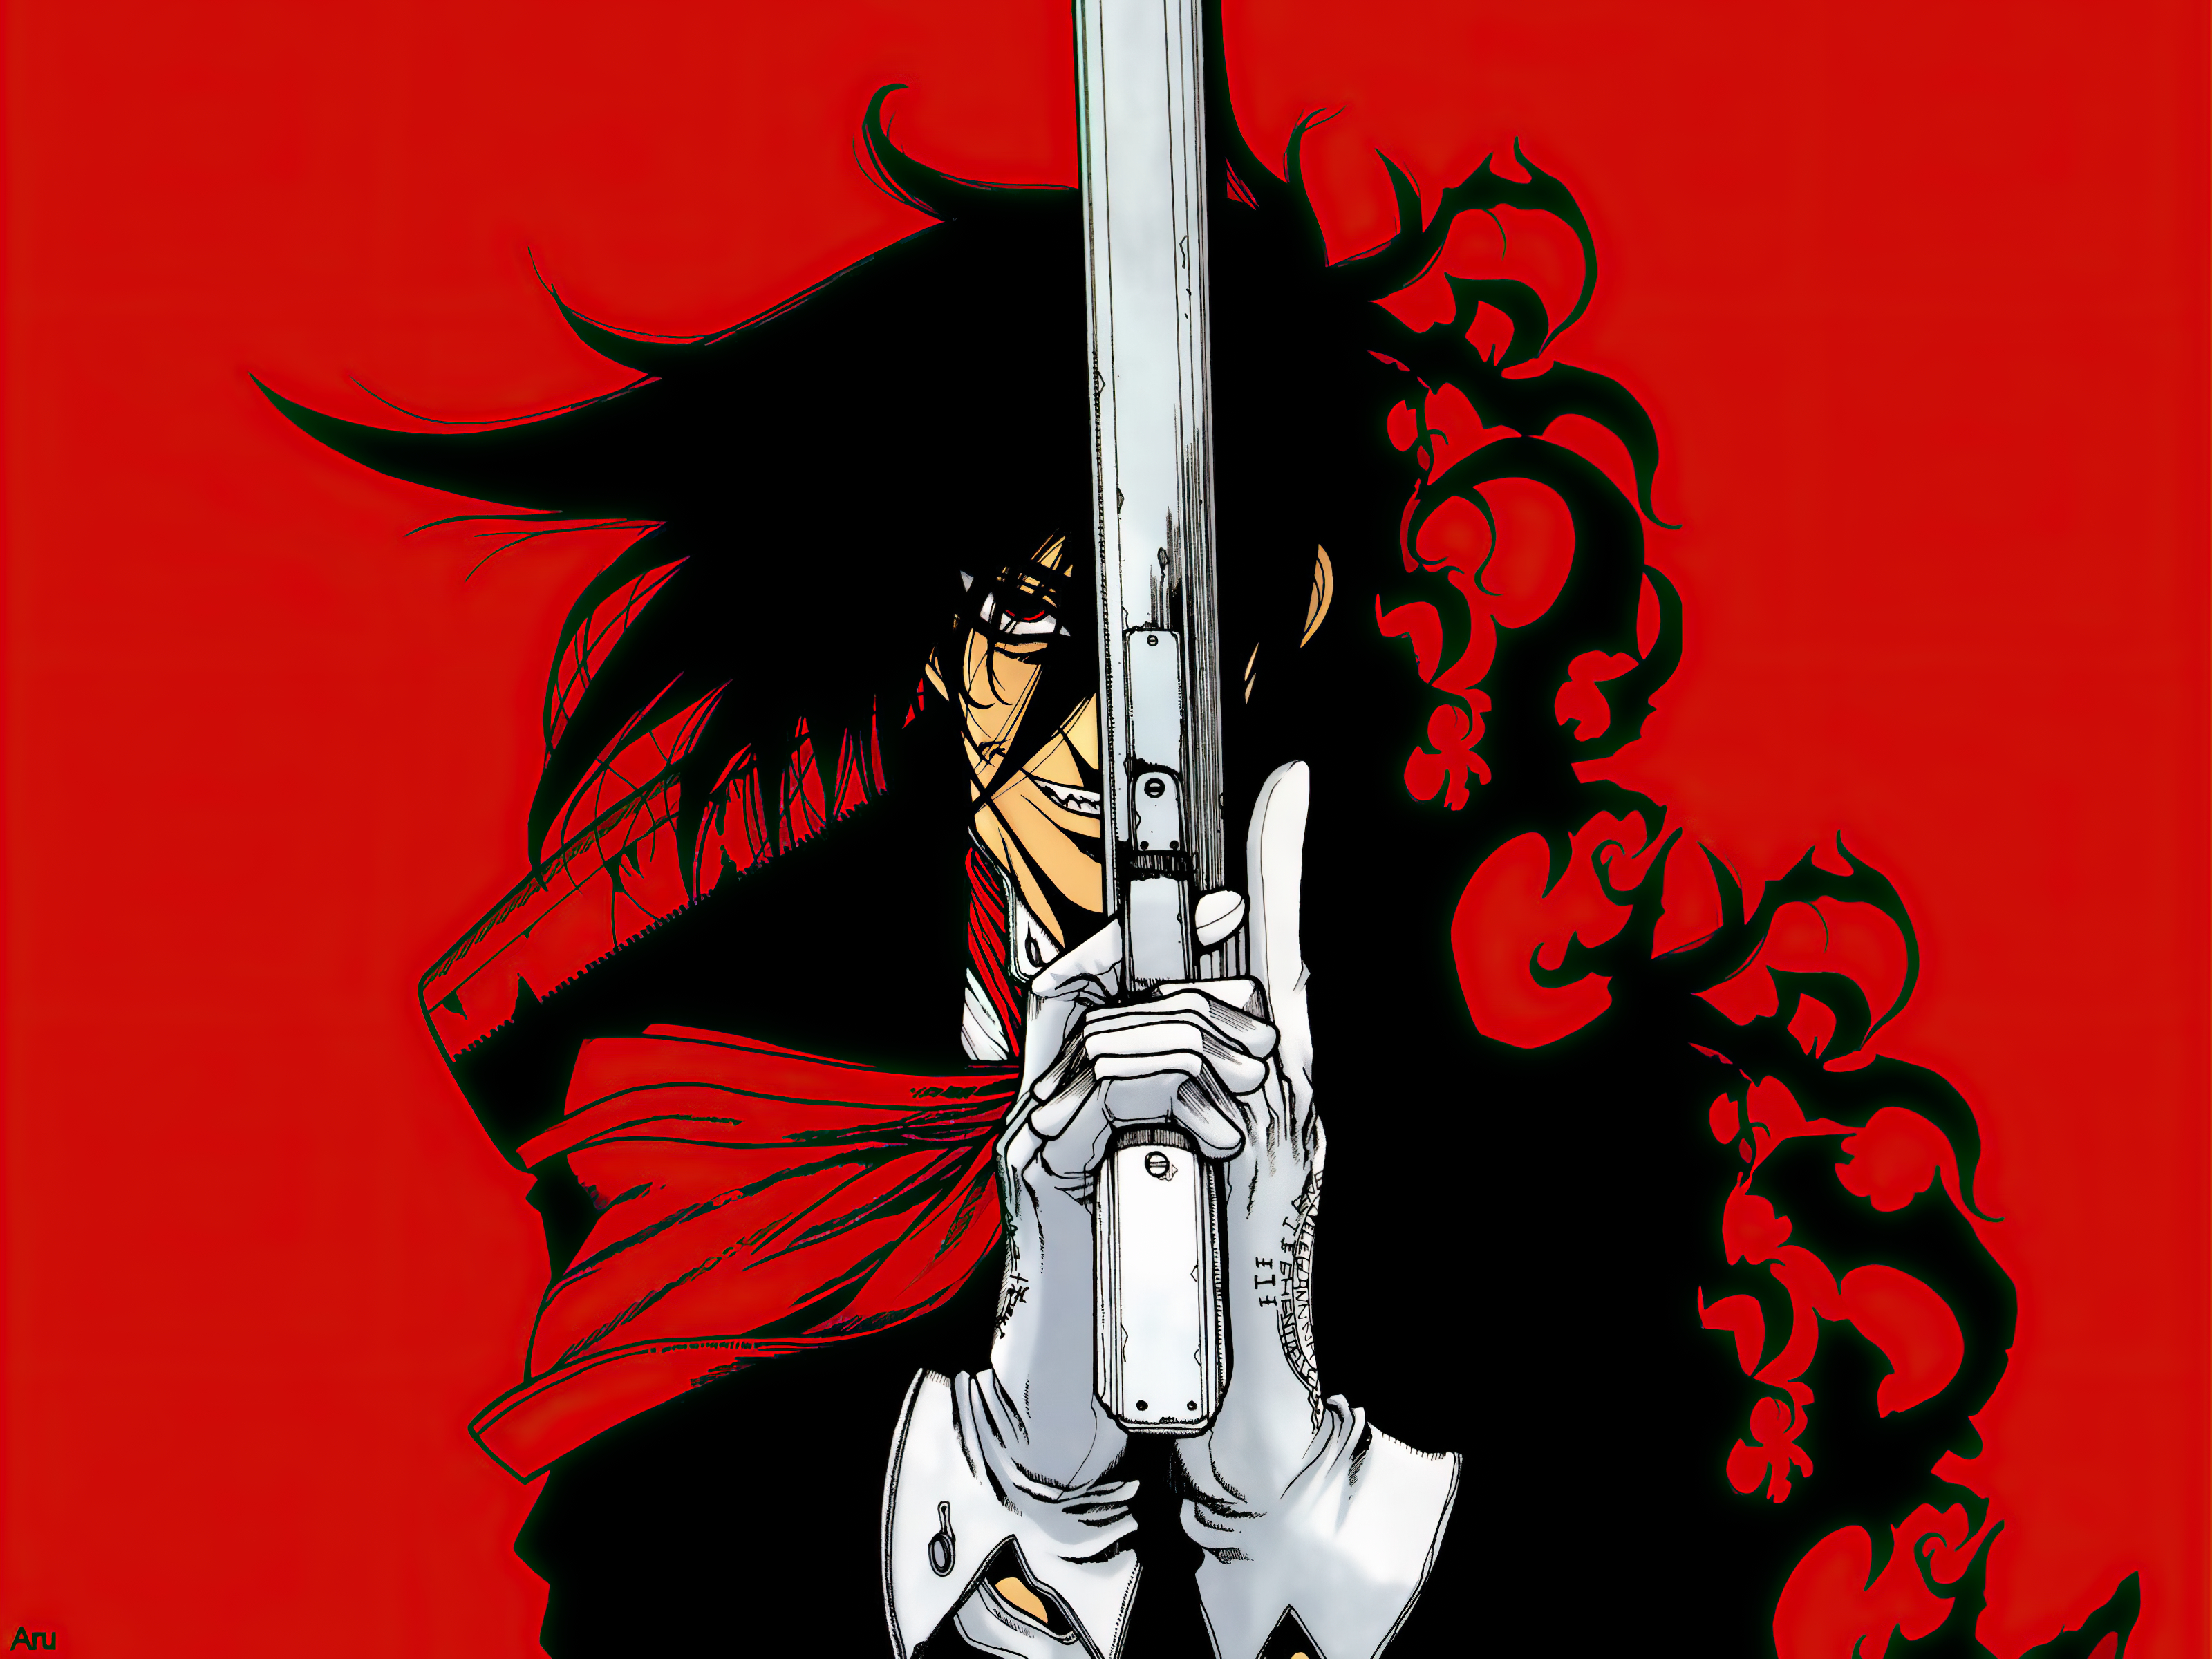 Alucard (Hellsing) wallpapers for desktop, download free Alucard (Hellsing)  pictures and backgrounds for PC 